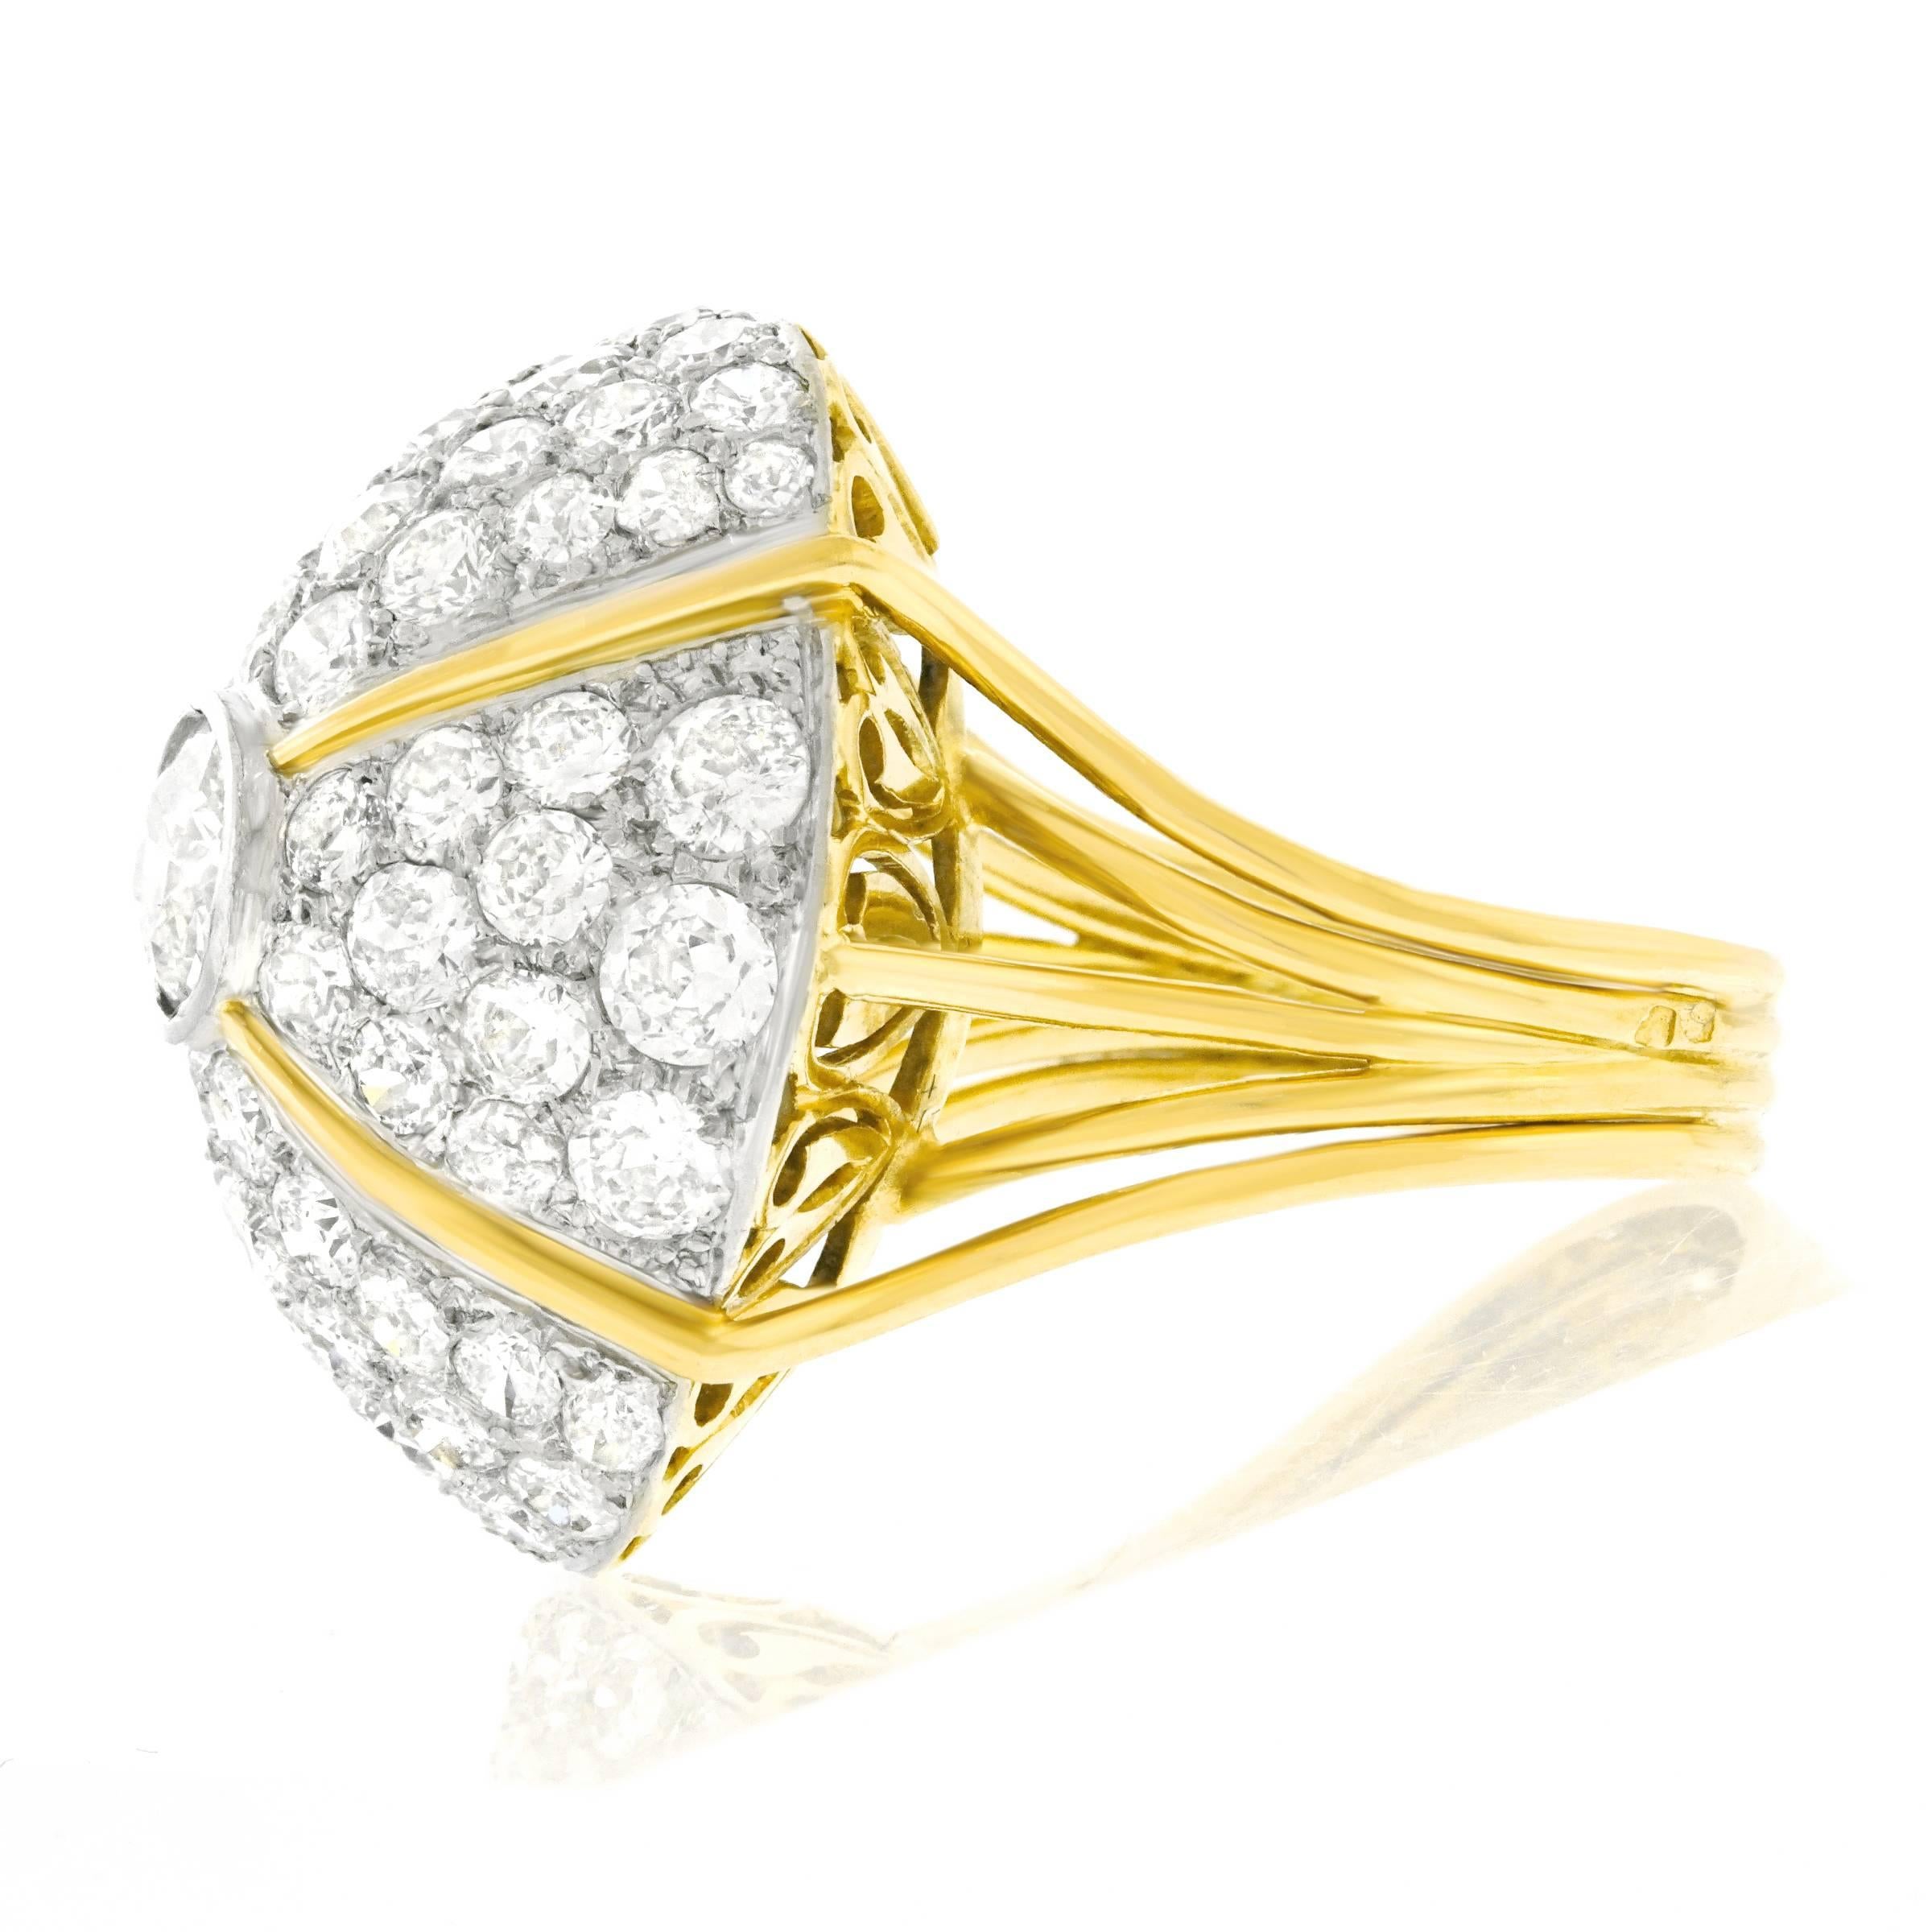 Stunning French Art Deco Diamond Cocktail Ring in Platinum 3